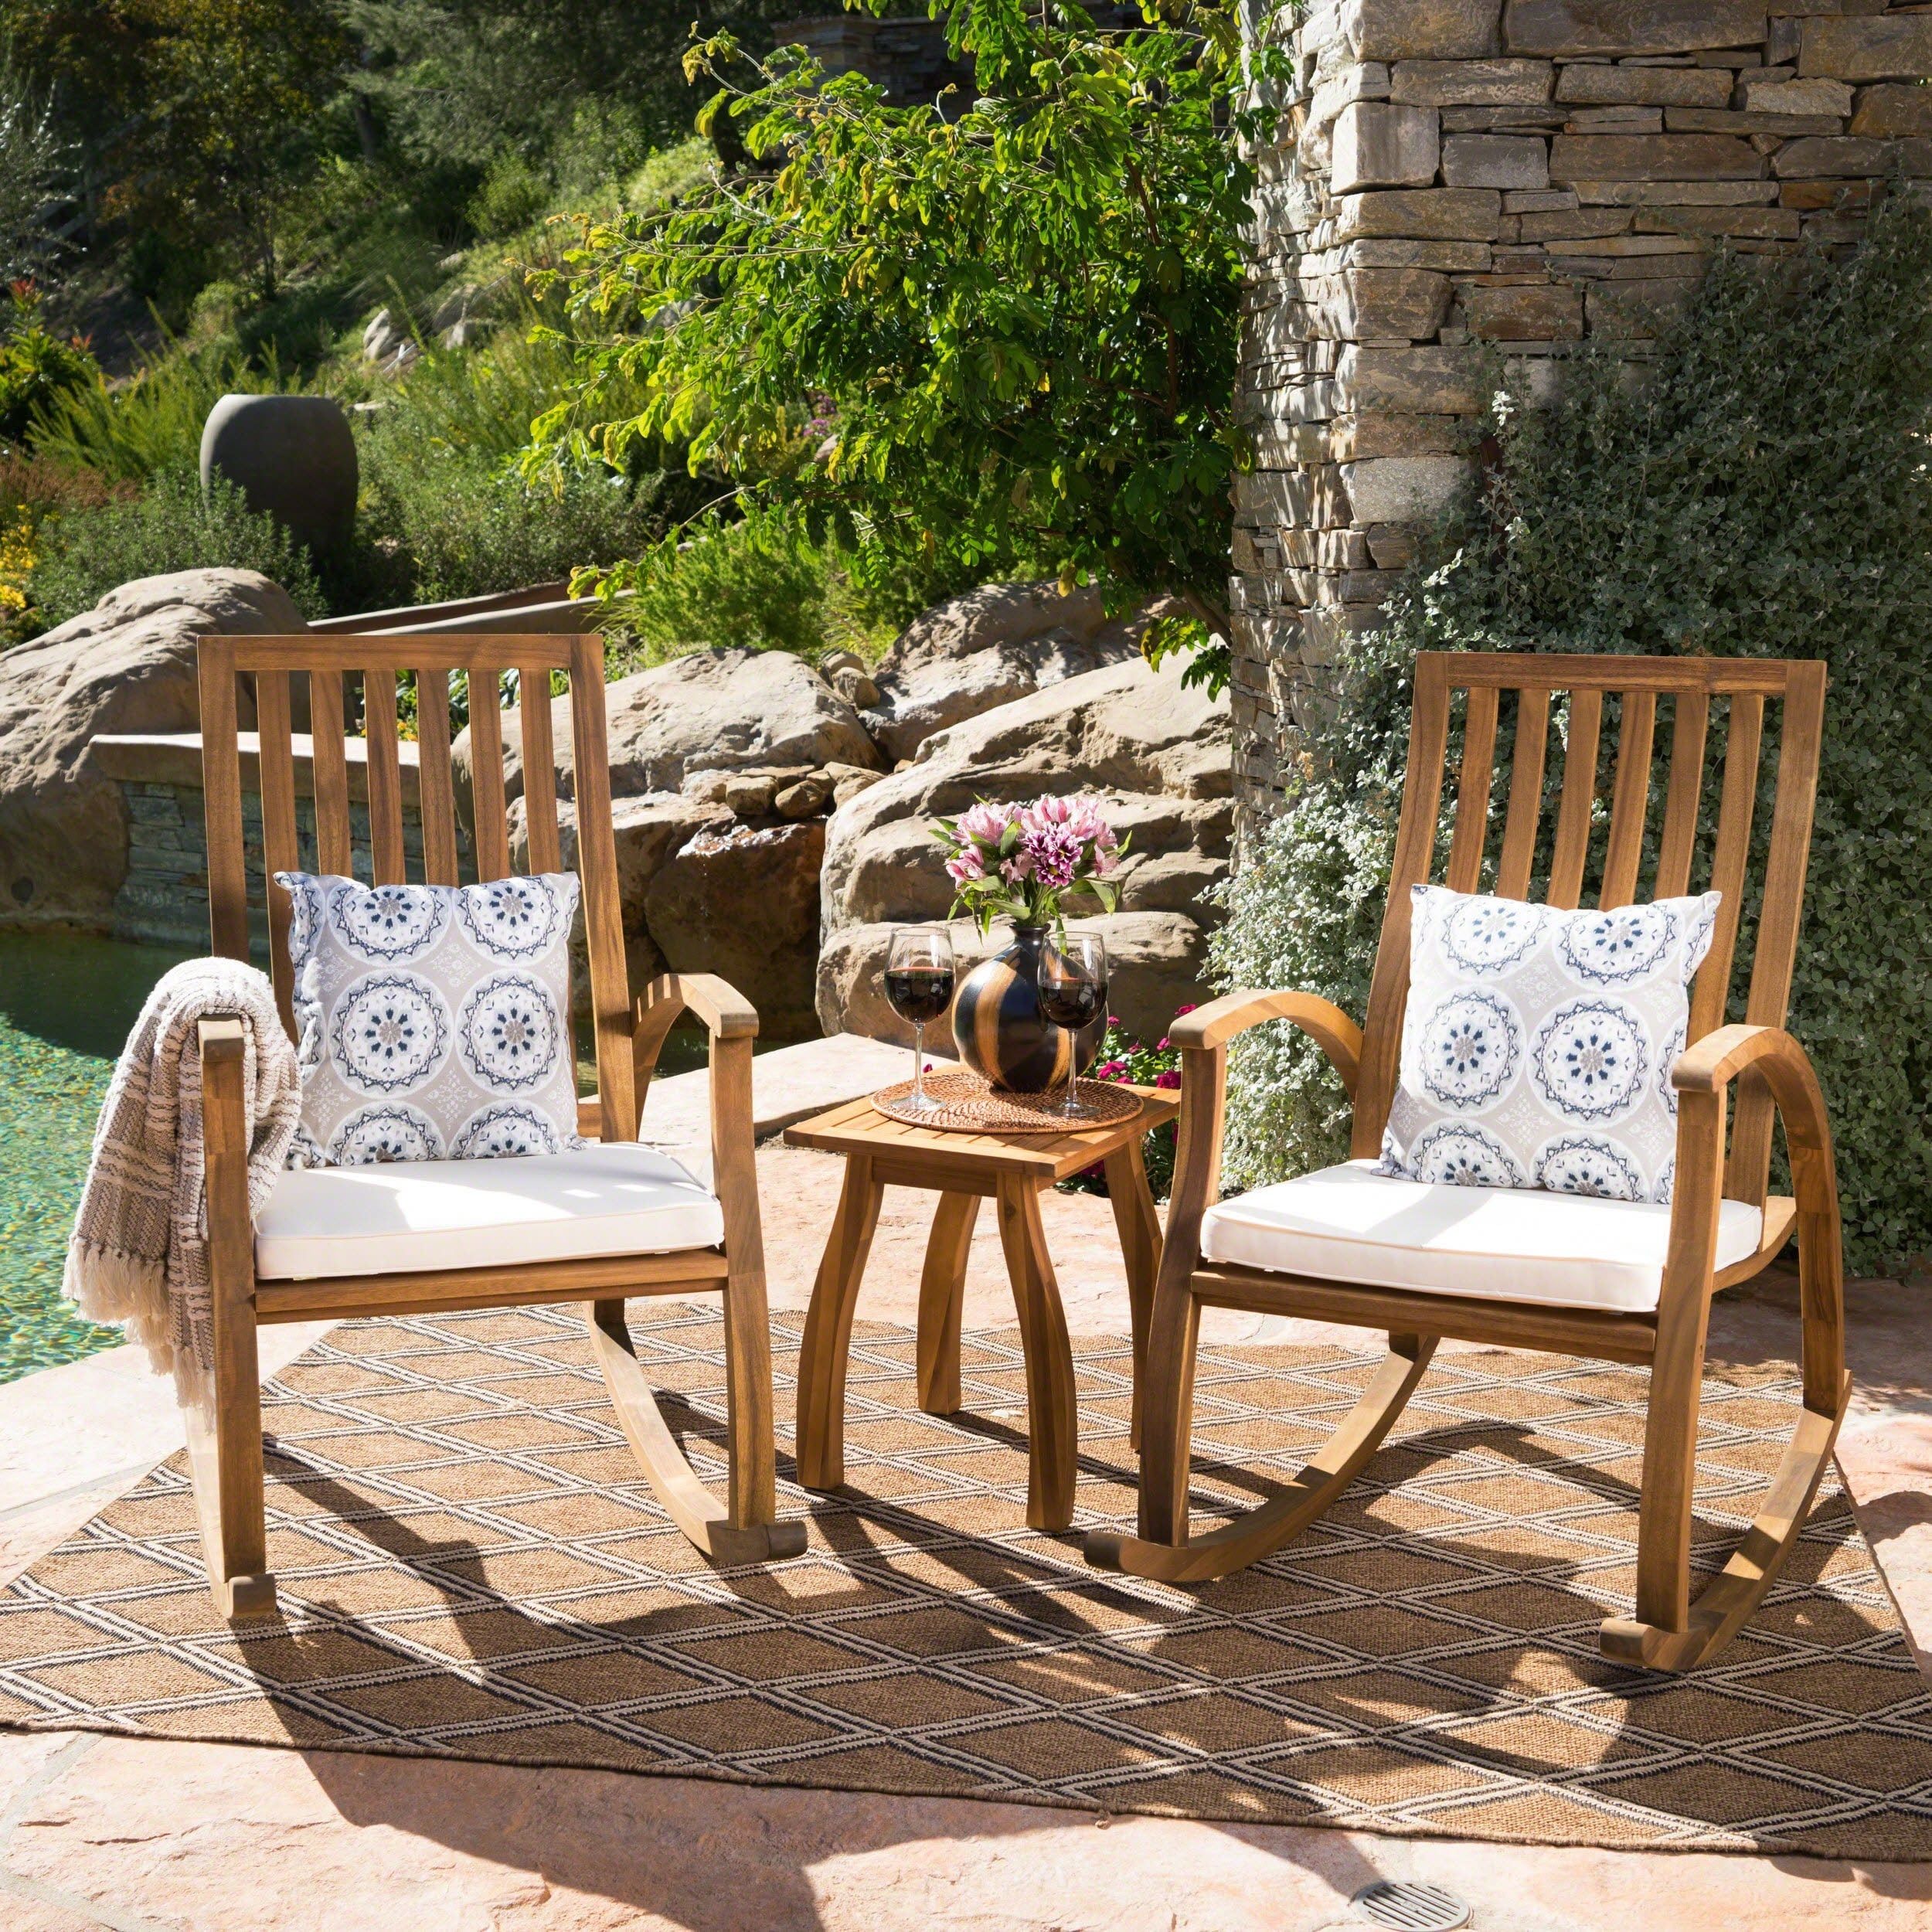 Cayo Acacia Wood Outdoor 3 Piece Rocking Chair Chat Set With Cushion Christopher Knight Home – On Sale – – 18158356 Regarding 3 Piece Cushion Rocking Chair Set (View 10 of 15)